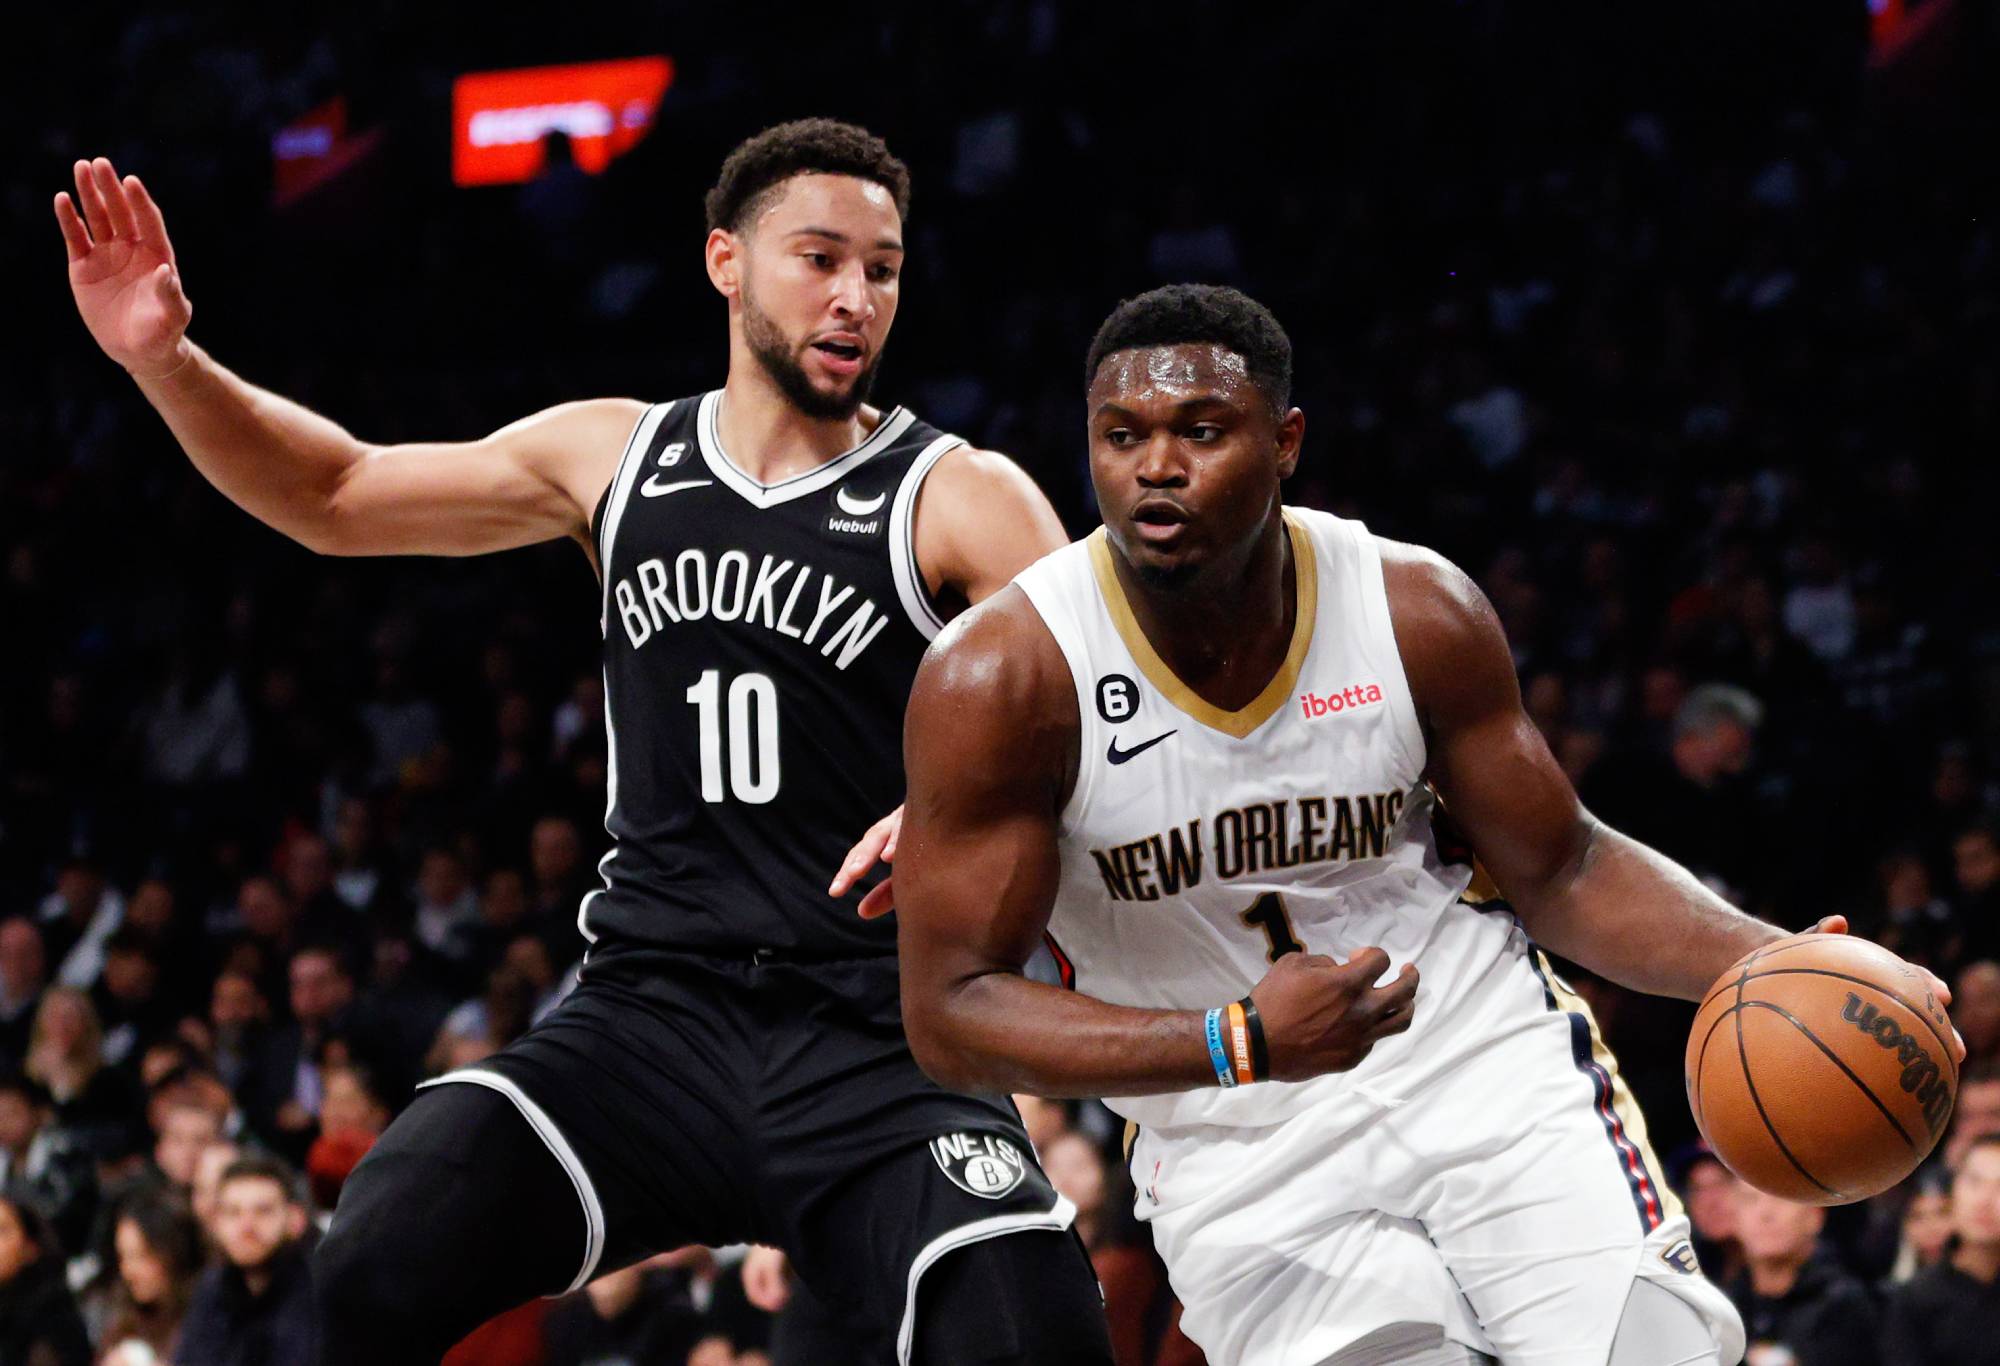 NEW YORK, NEW YORK – OCTOBER 19: Zion Williamson #1 of the New Orleans Pelicans dribbles against Ben Simmons #10 of the Brooklyn Nets during the first half at Barclays Center on October 19, 2022 in the borough of Brooklyn in New York.  NOTE TO USER: User expressly acknowledges and agrees that by downloading and/or using this photograph, user accepts the terms and conditions of the Getty Images License Agreement.  (Photo by Sarah Stier/Getty Images)